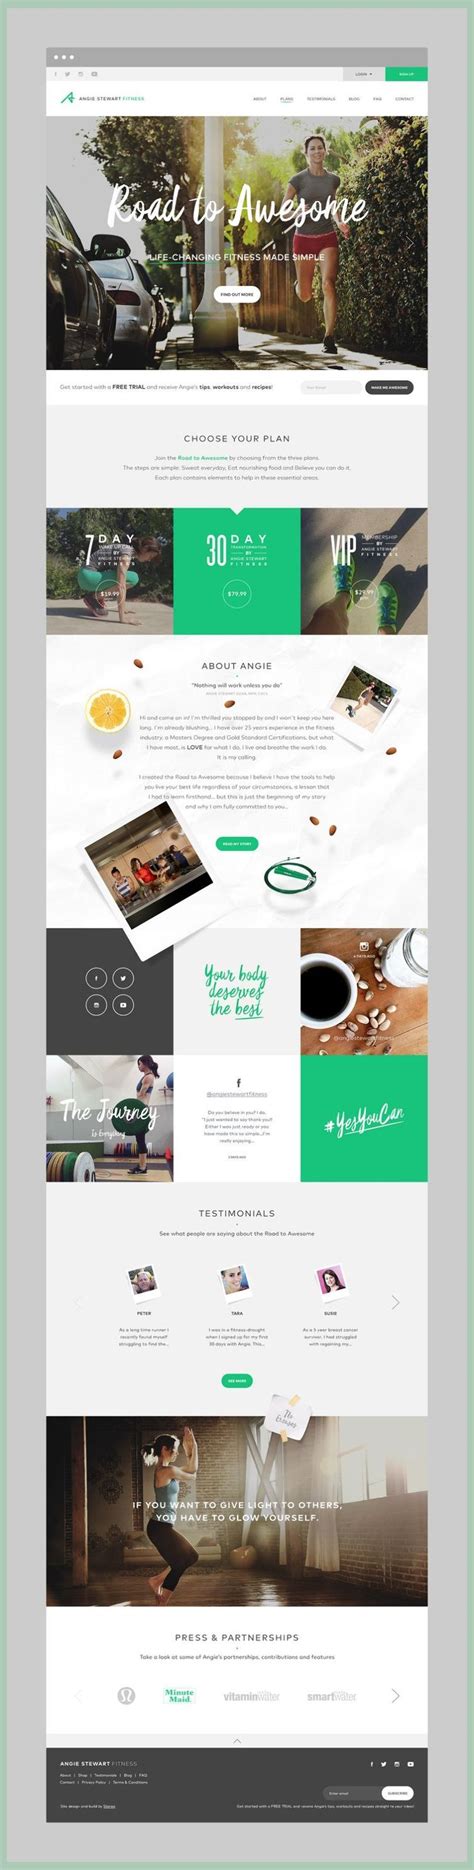 collection      website layout examples  concepts